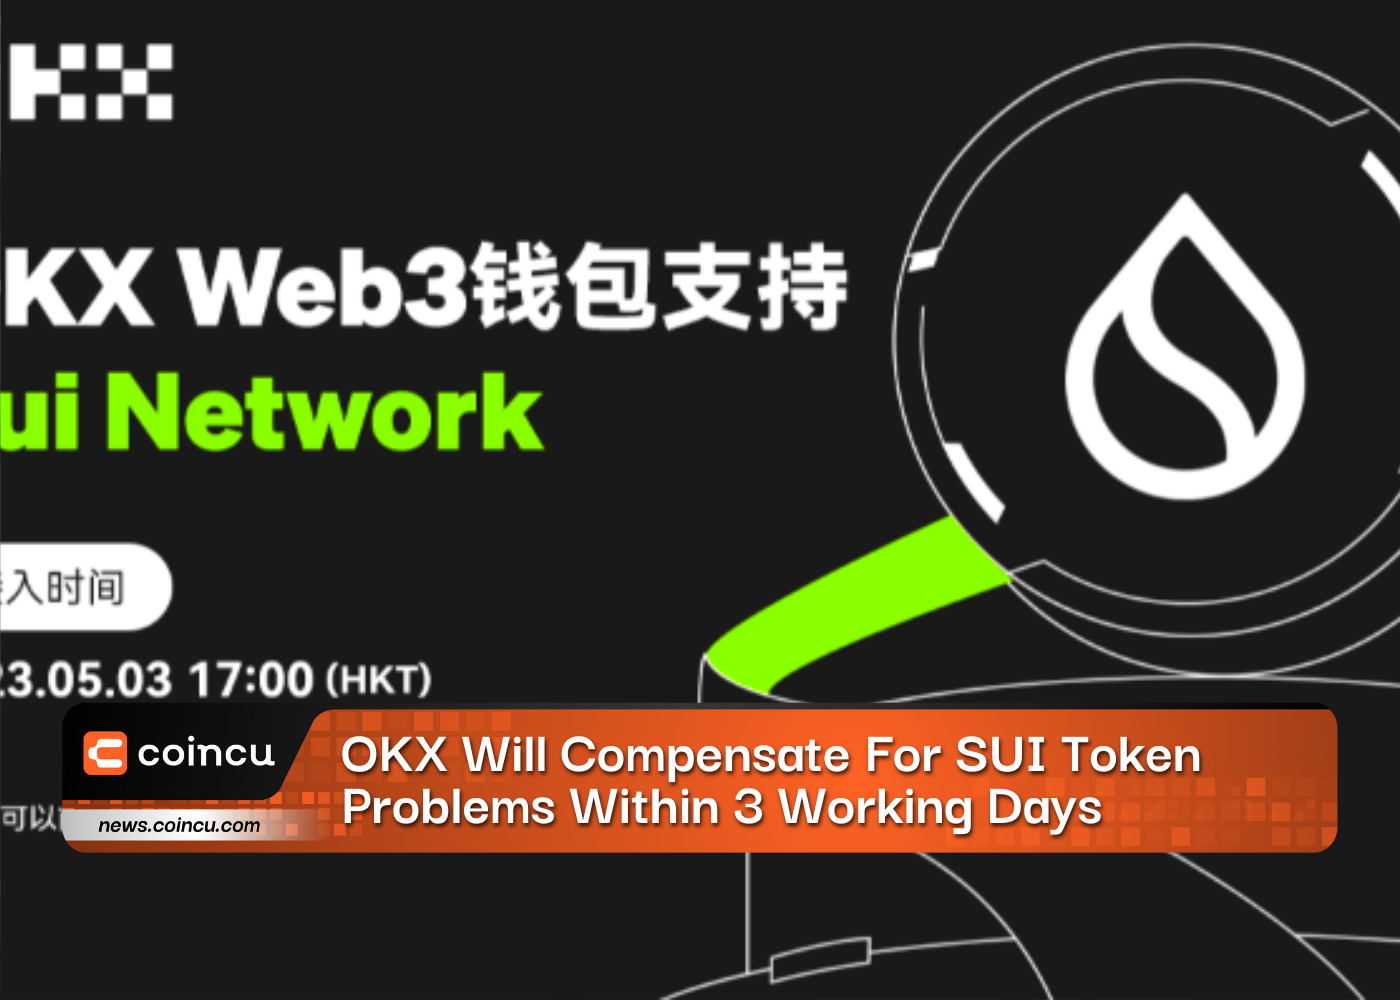 OKX Will Compensate For SUI Token Problems Within 3 Working Days